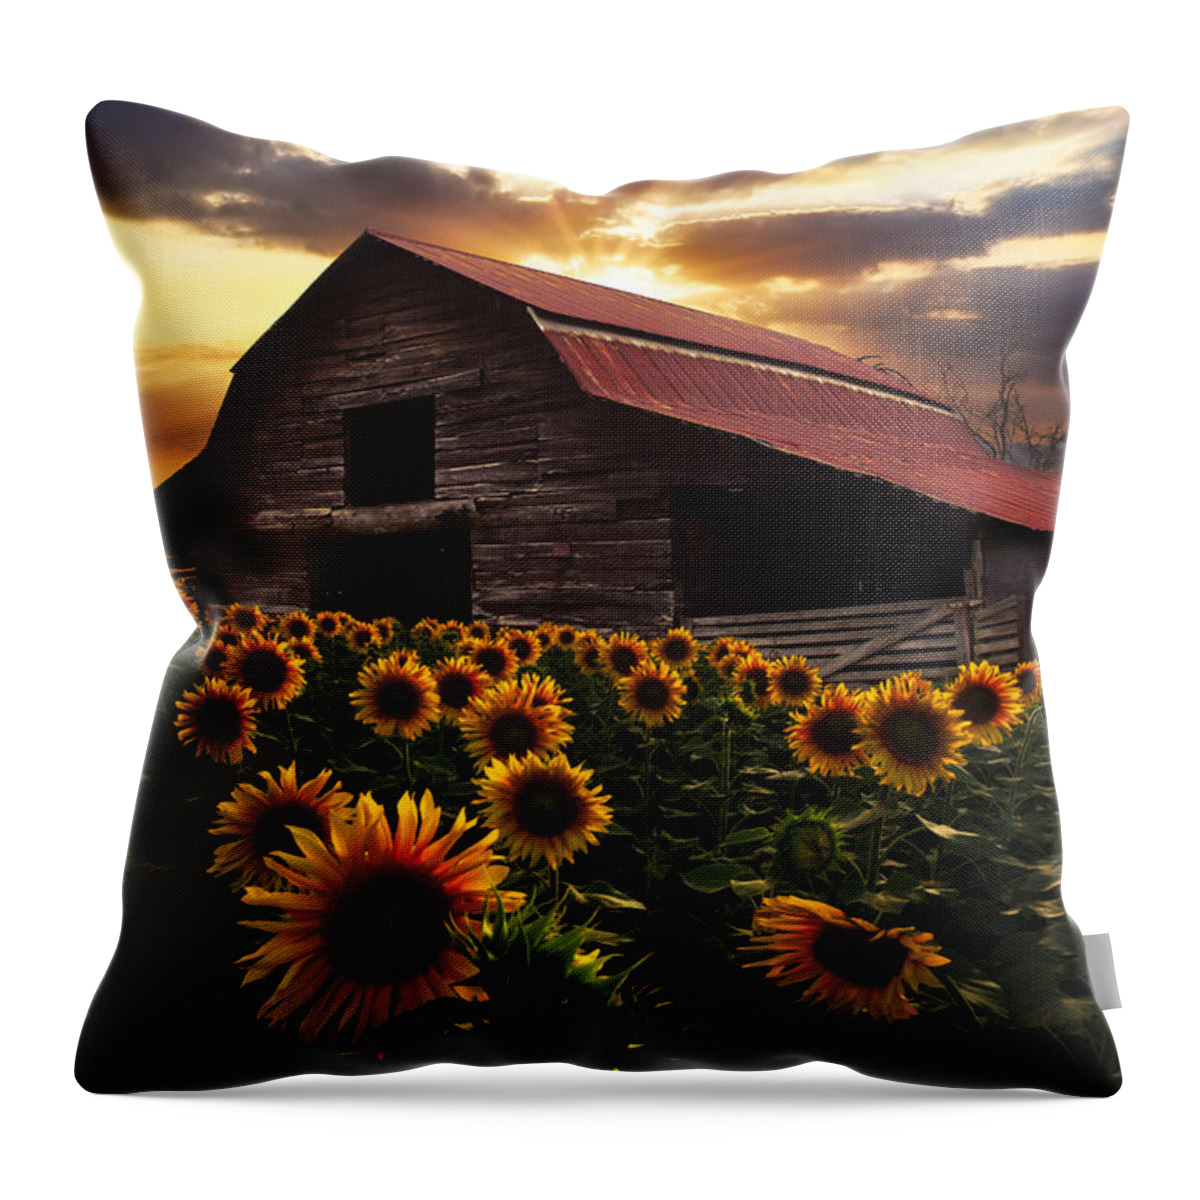 Sunflowers Throw Pillow featuring the photograph Sunflower Farm by Debra and Dave Vanderlaan